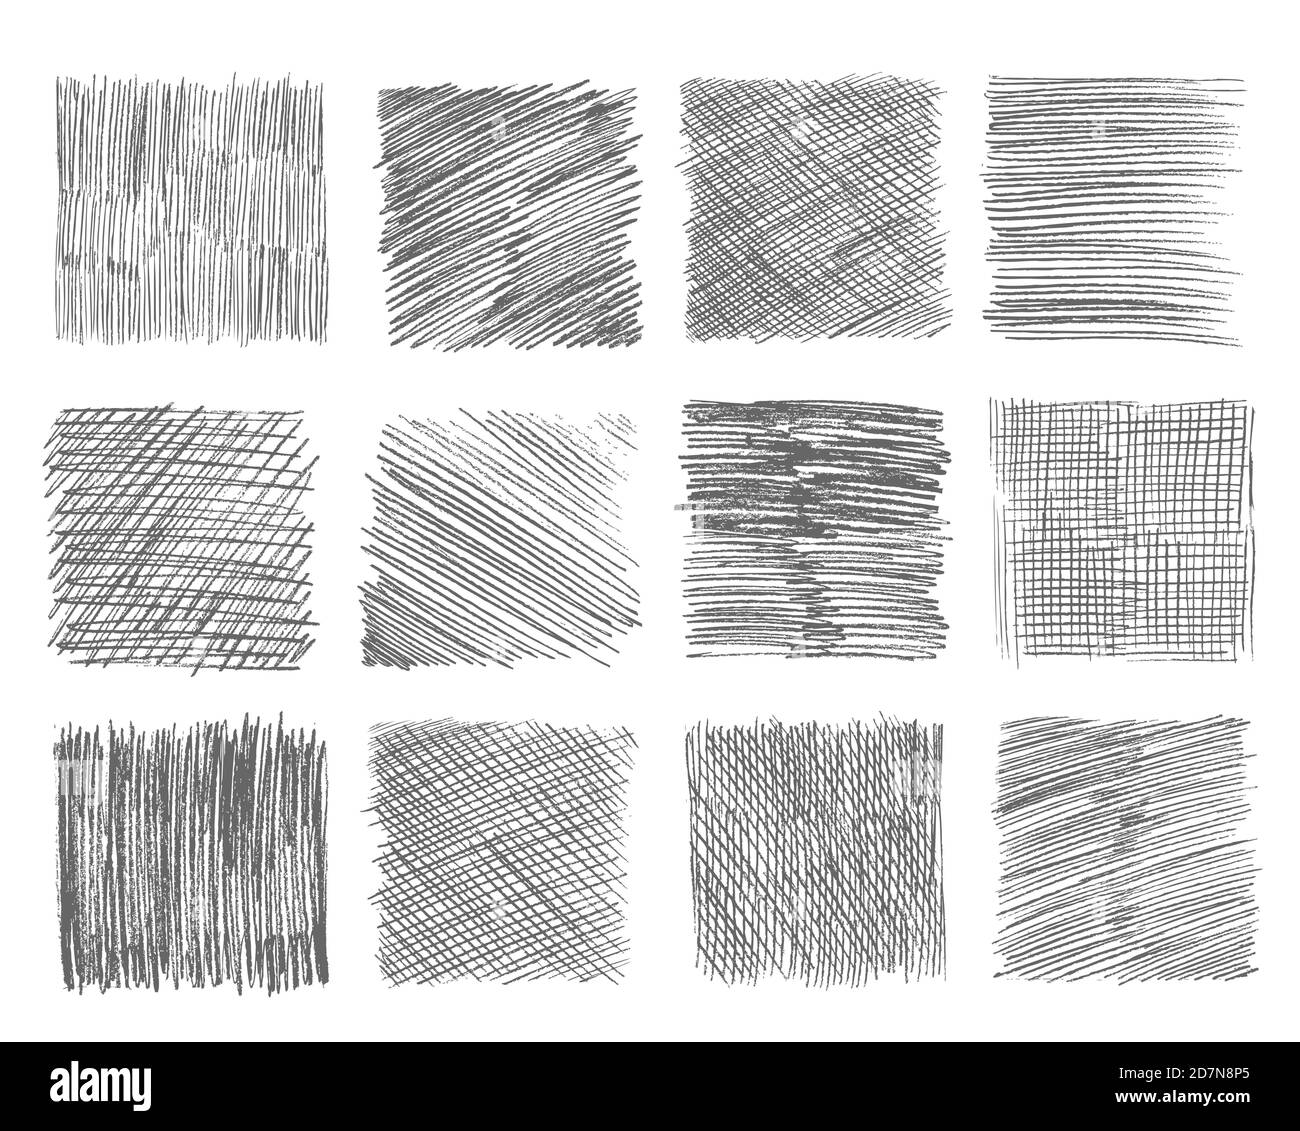 Sketch hatching. Pen doodle freehand line strokes chalk scribble black line sketch grunge handmade vector abstract textures. Scribble chalk, sketch freehand line drawing illustration Stock Vector